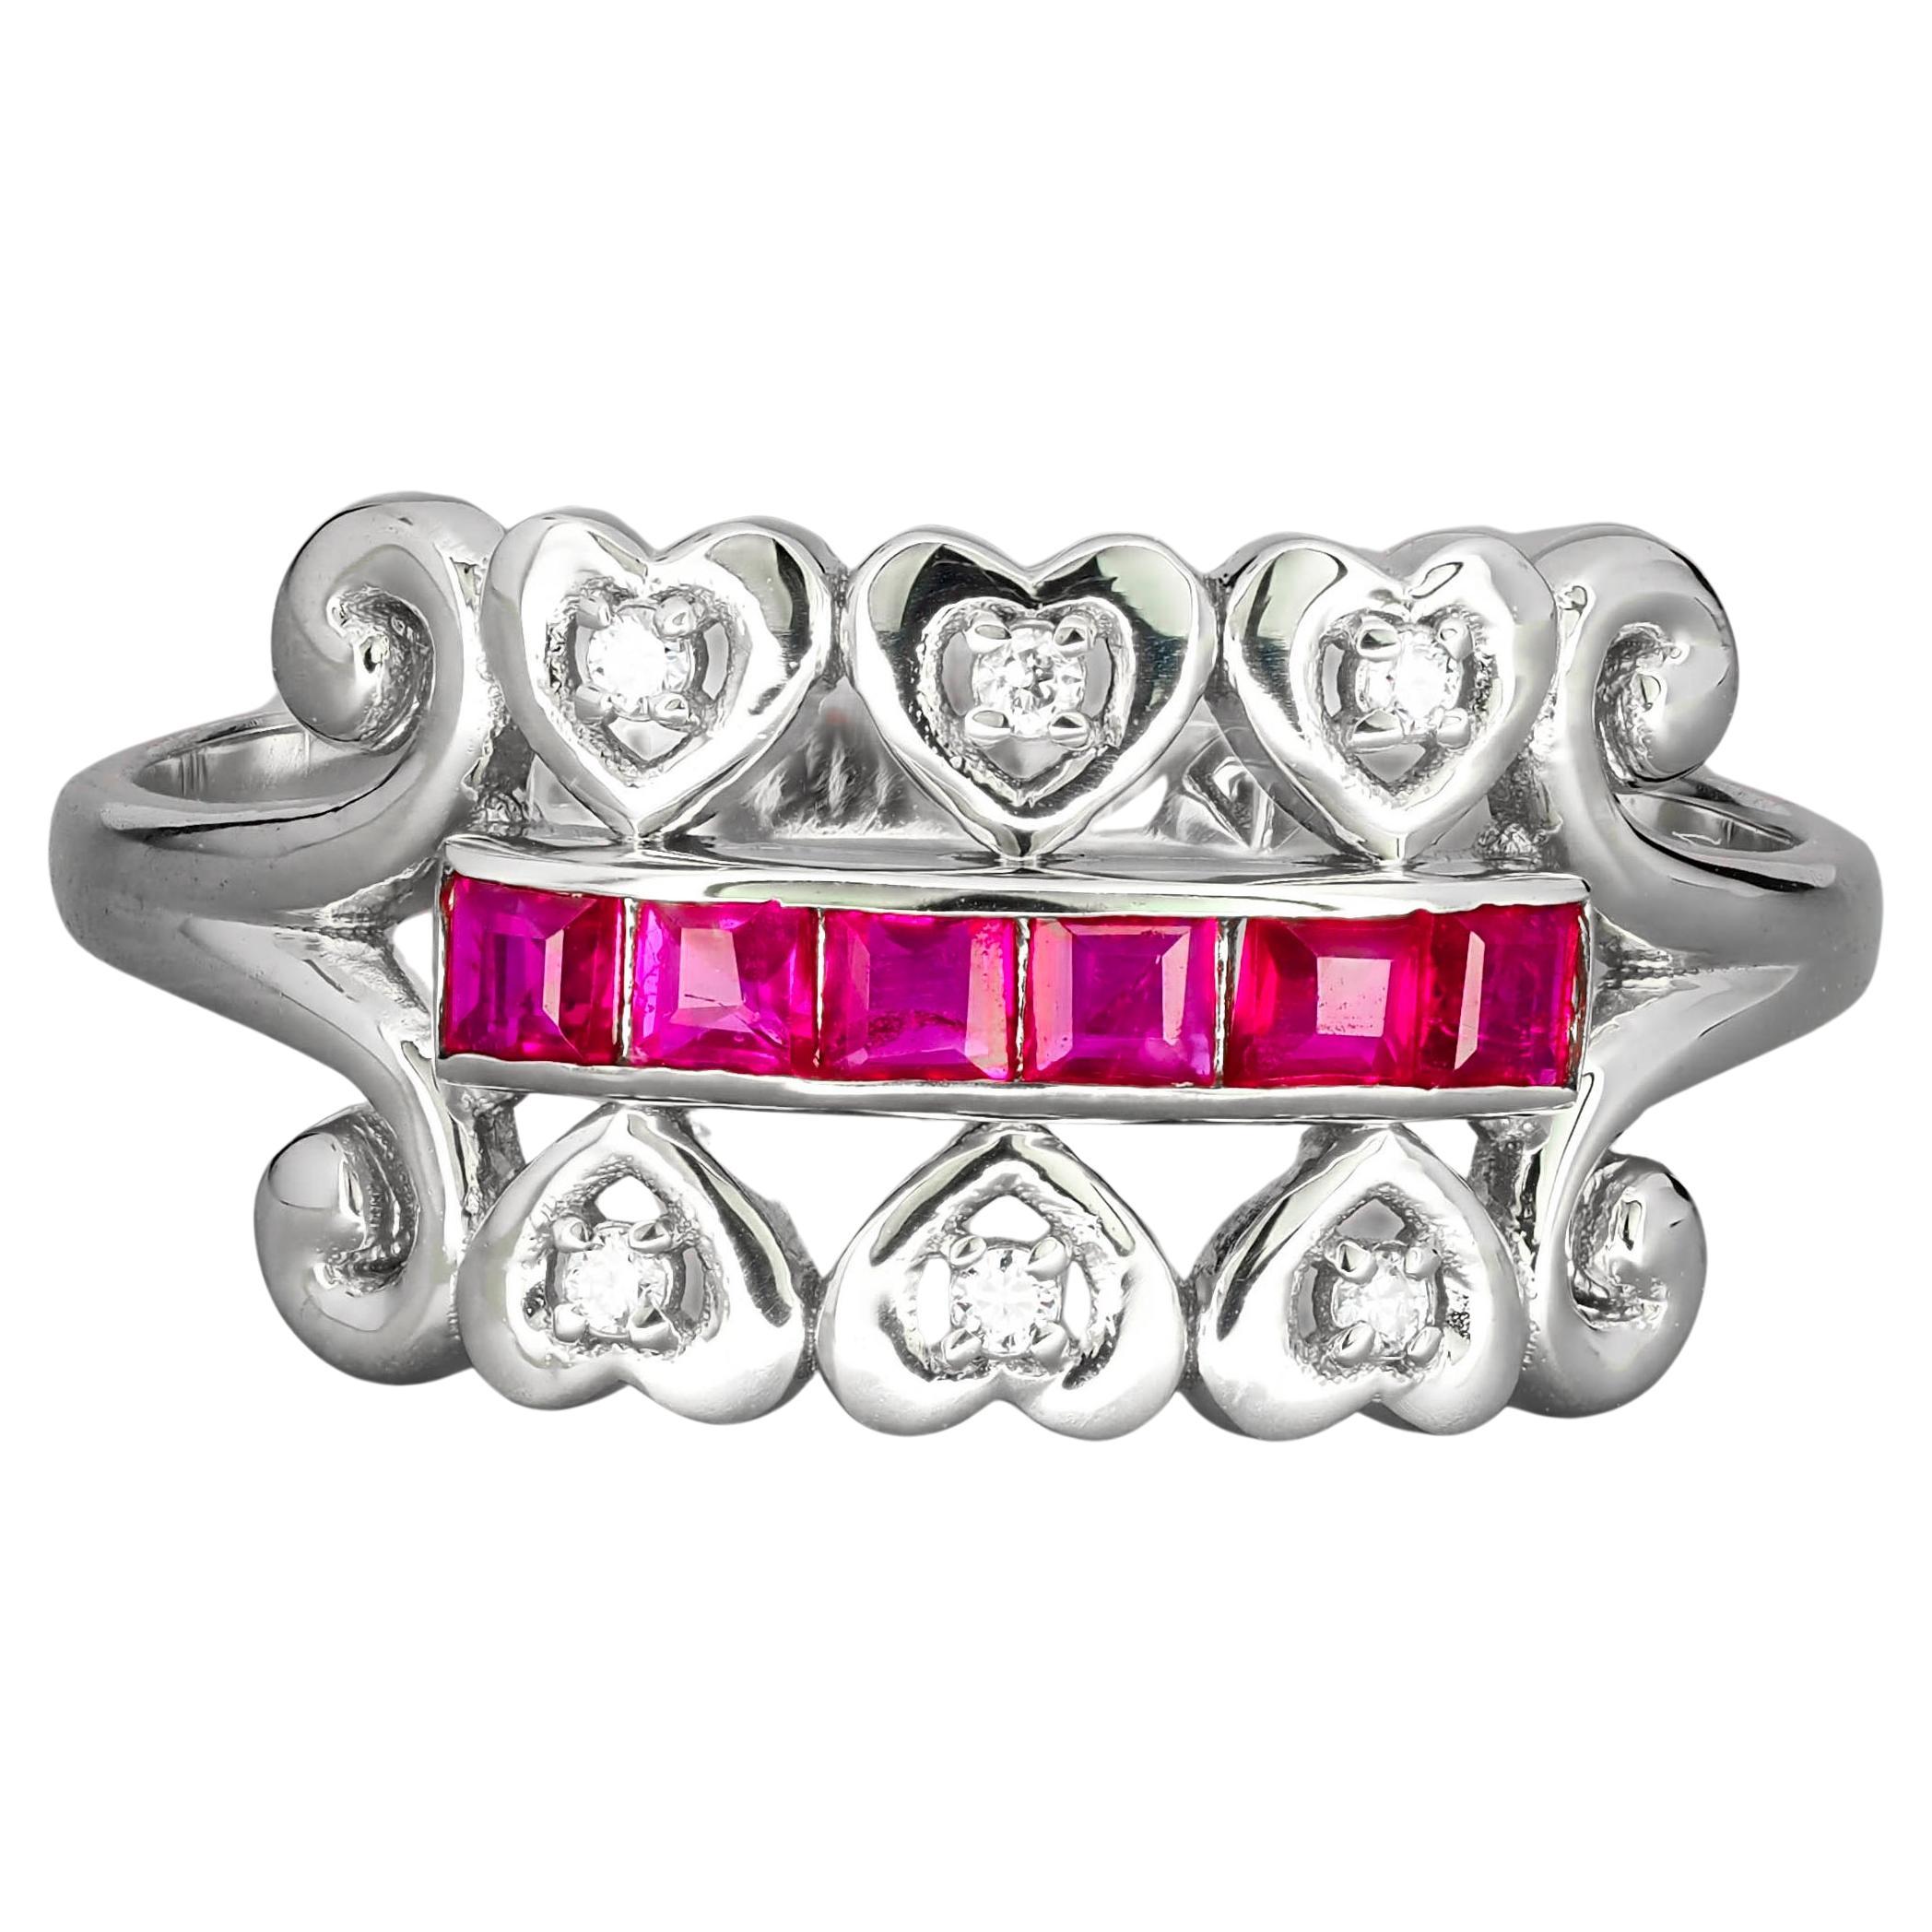 Red princess ruby gemstone 14k gold ring. For Sale